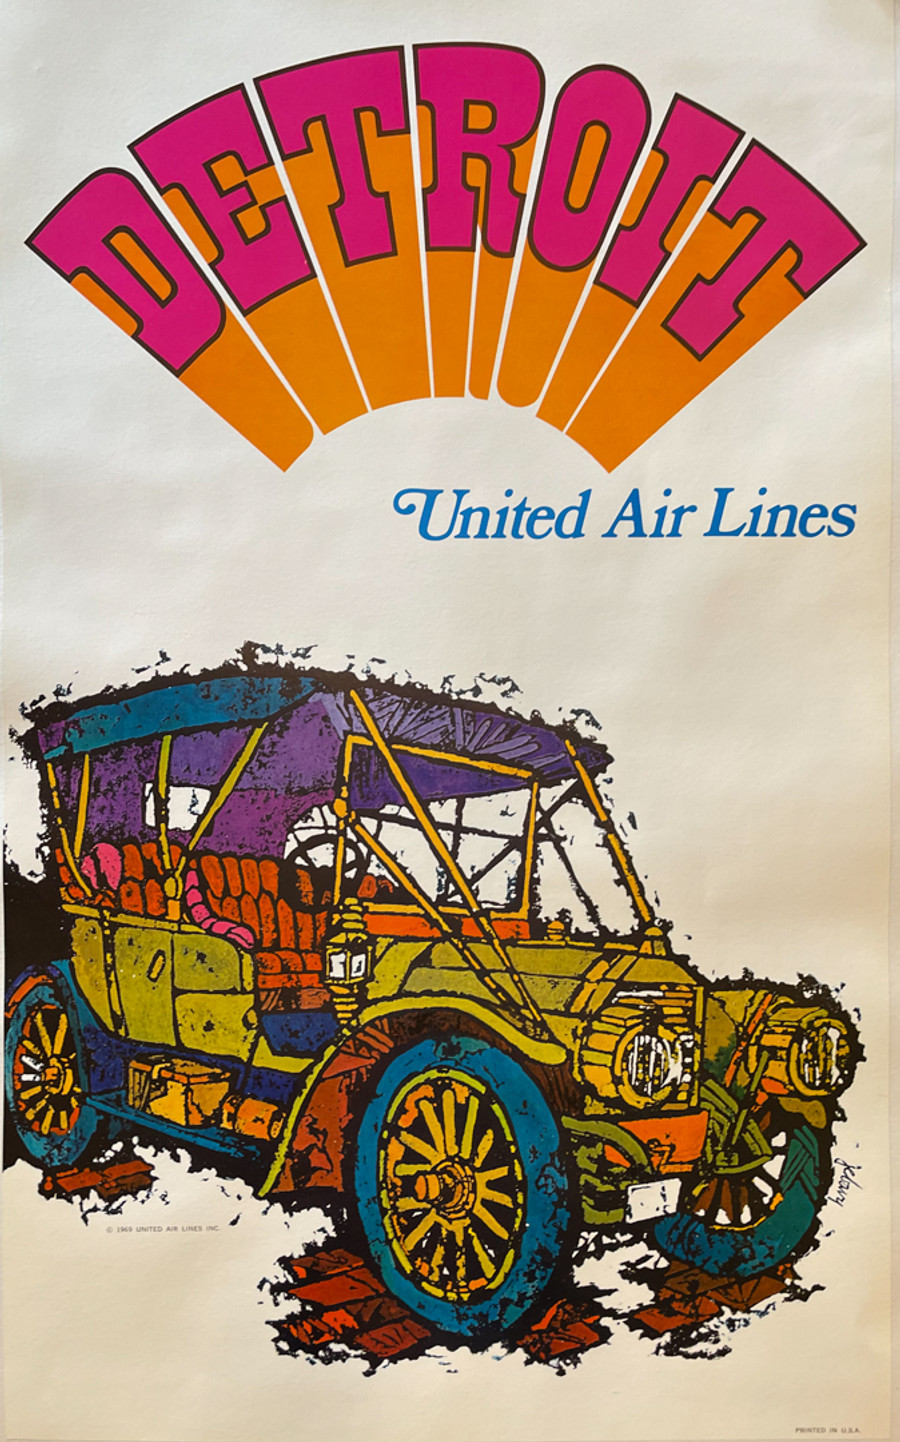 Detroit-United Airlines by Jebavy, original vintage US airline poster printed circa 1969. A condition. Mounted on archival linen.